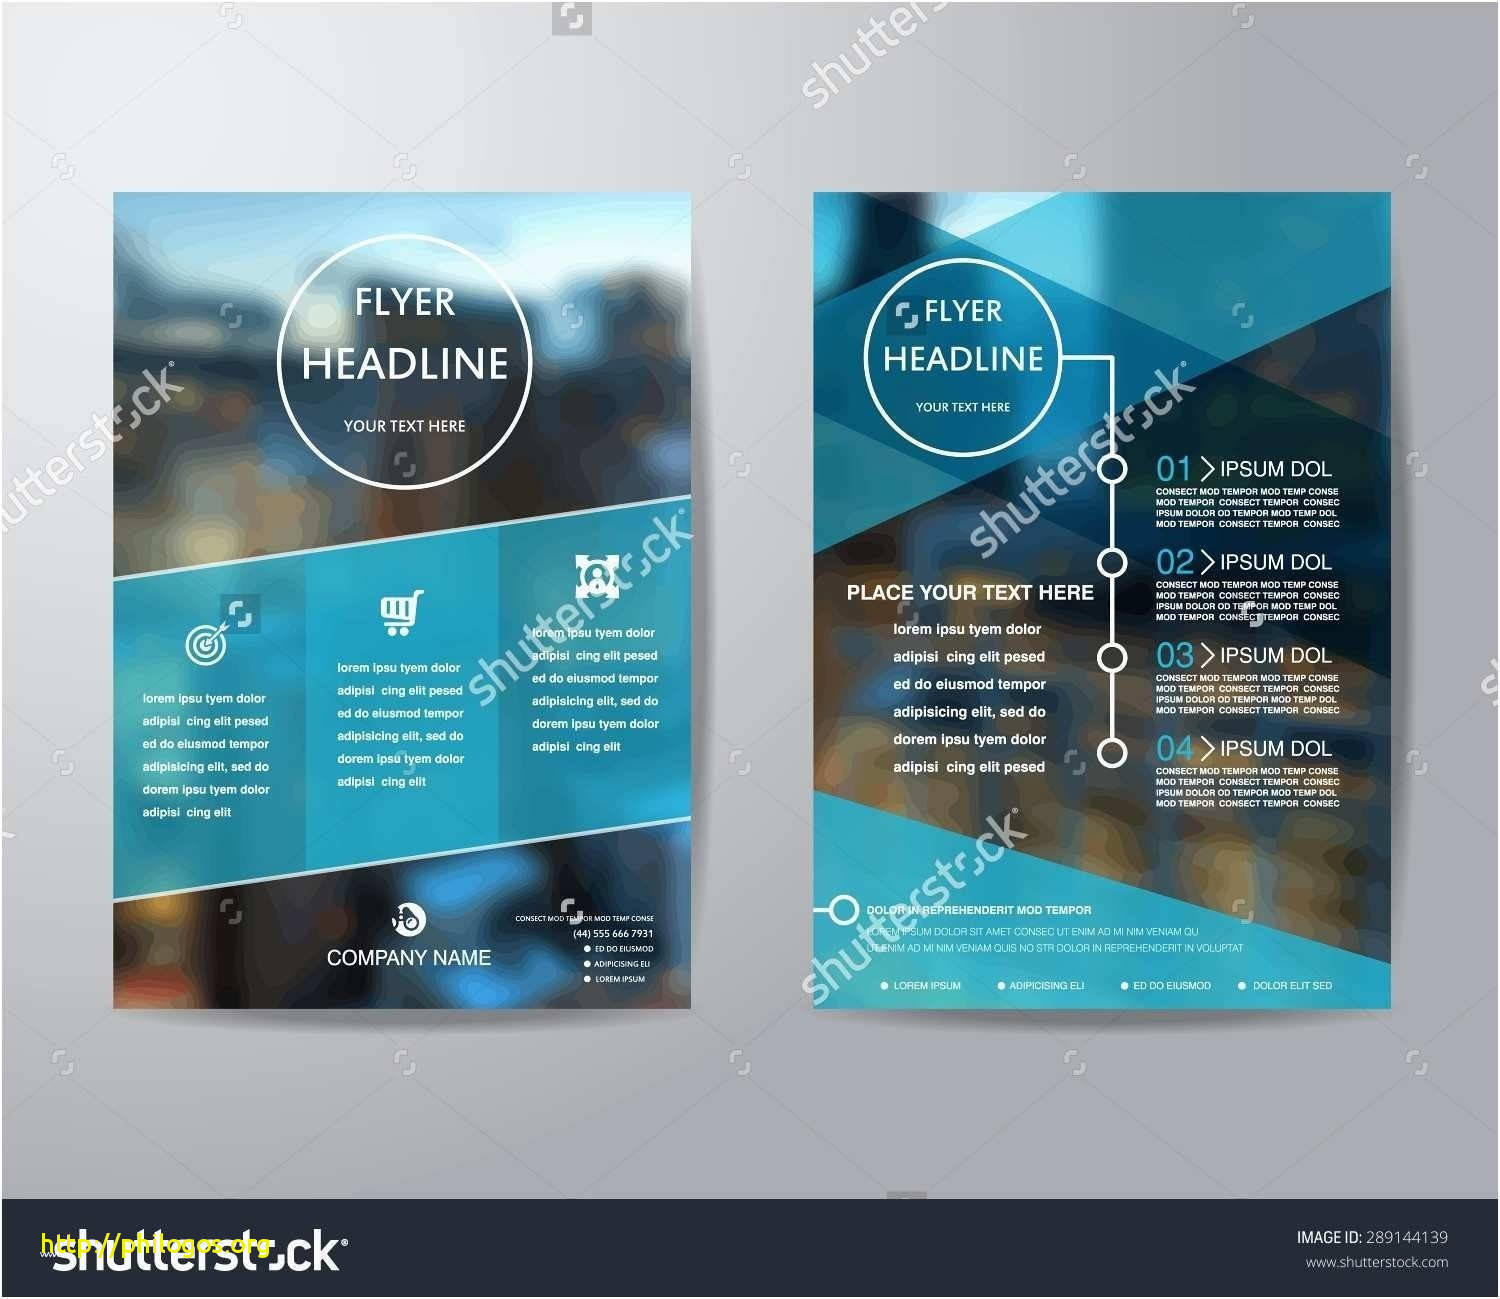 Elegant Free Business Card Psd Template Of Personal Business Cards Templates Free